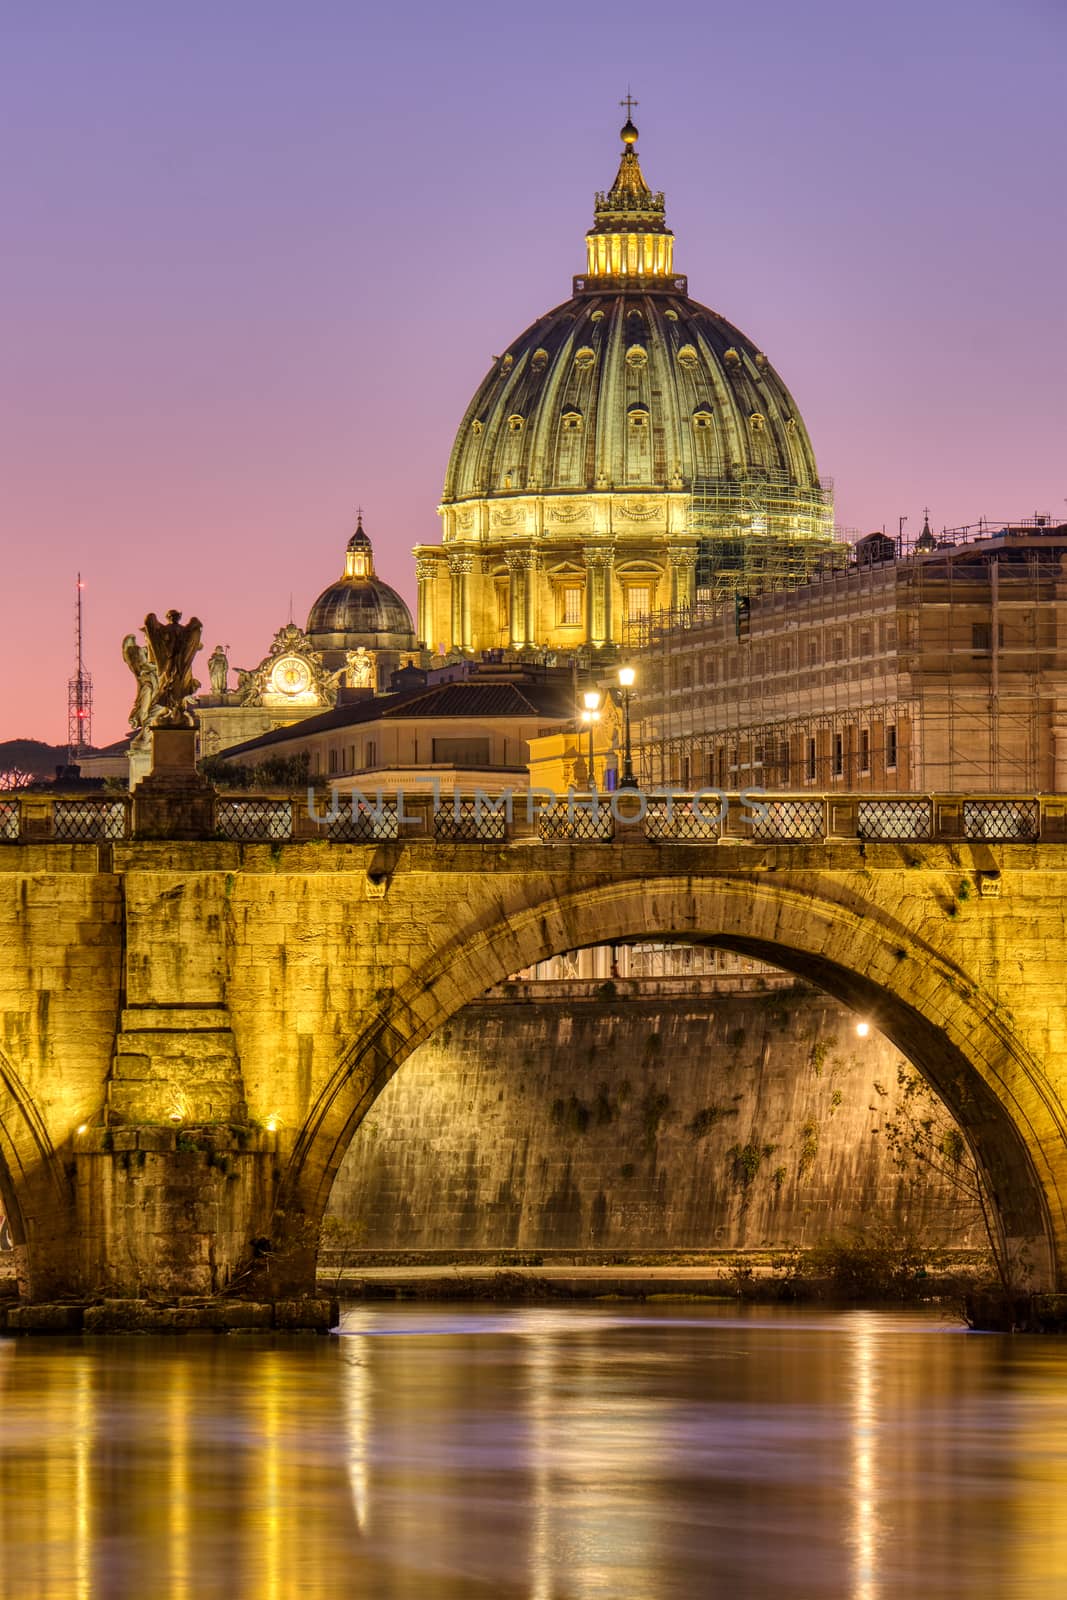 The St. Peters Basilica in the Vatican City, Italy, at twilight